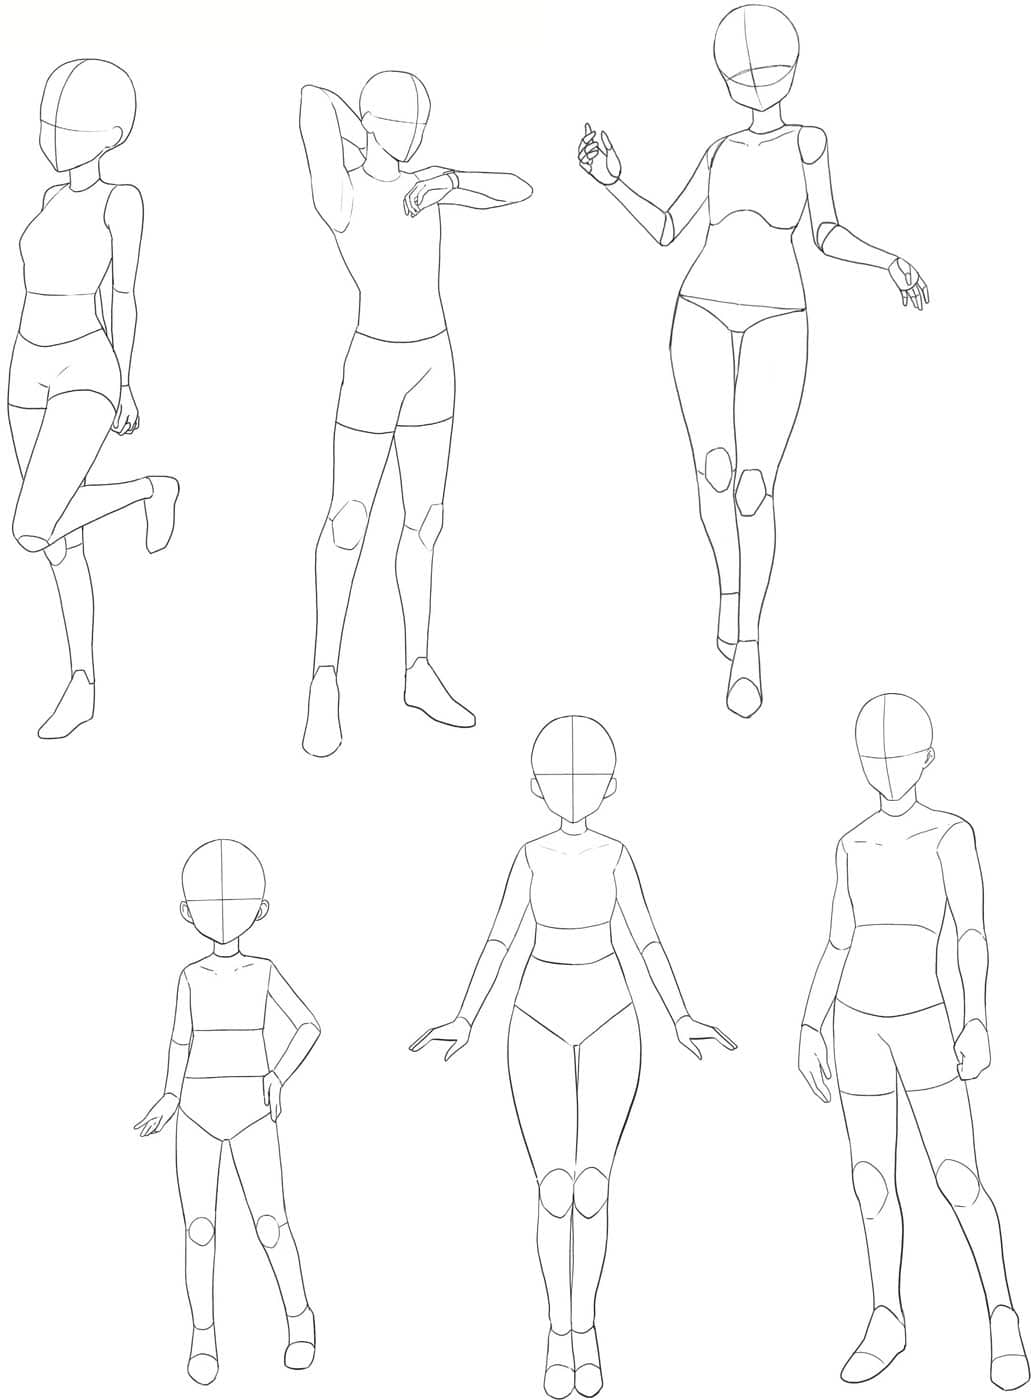 Just some anime poses | Drawing base, Art reference, Drawing reference poses